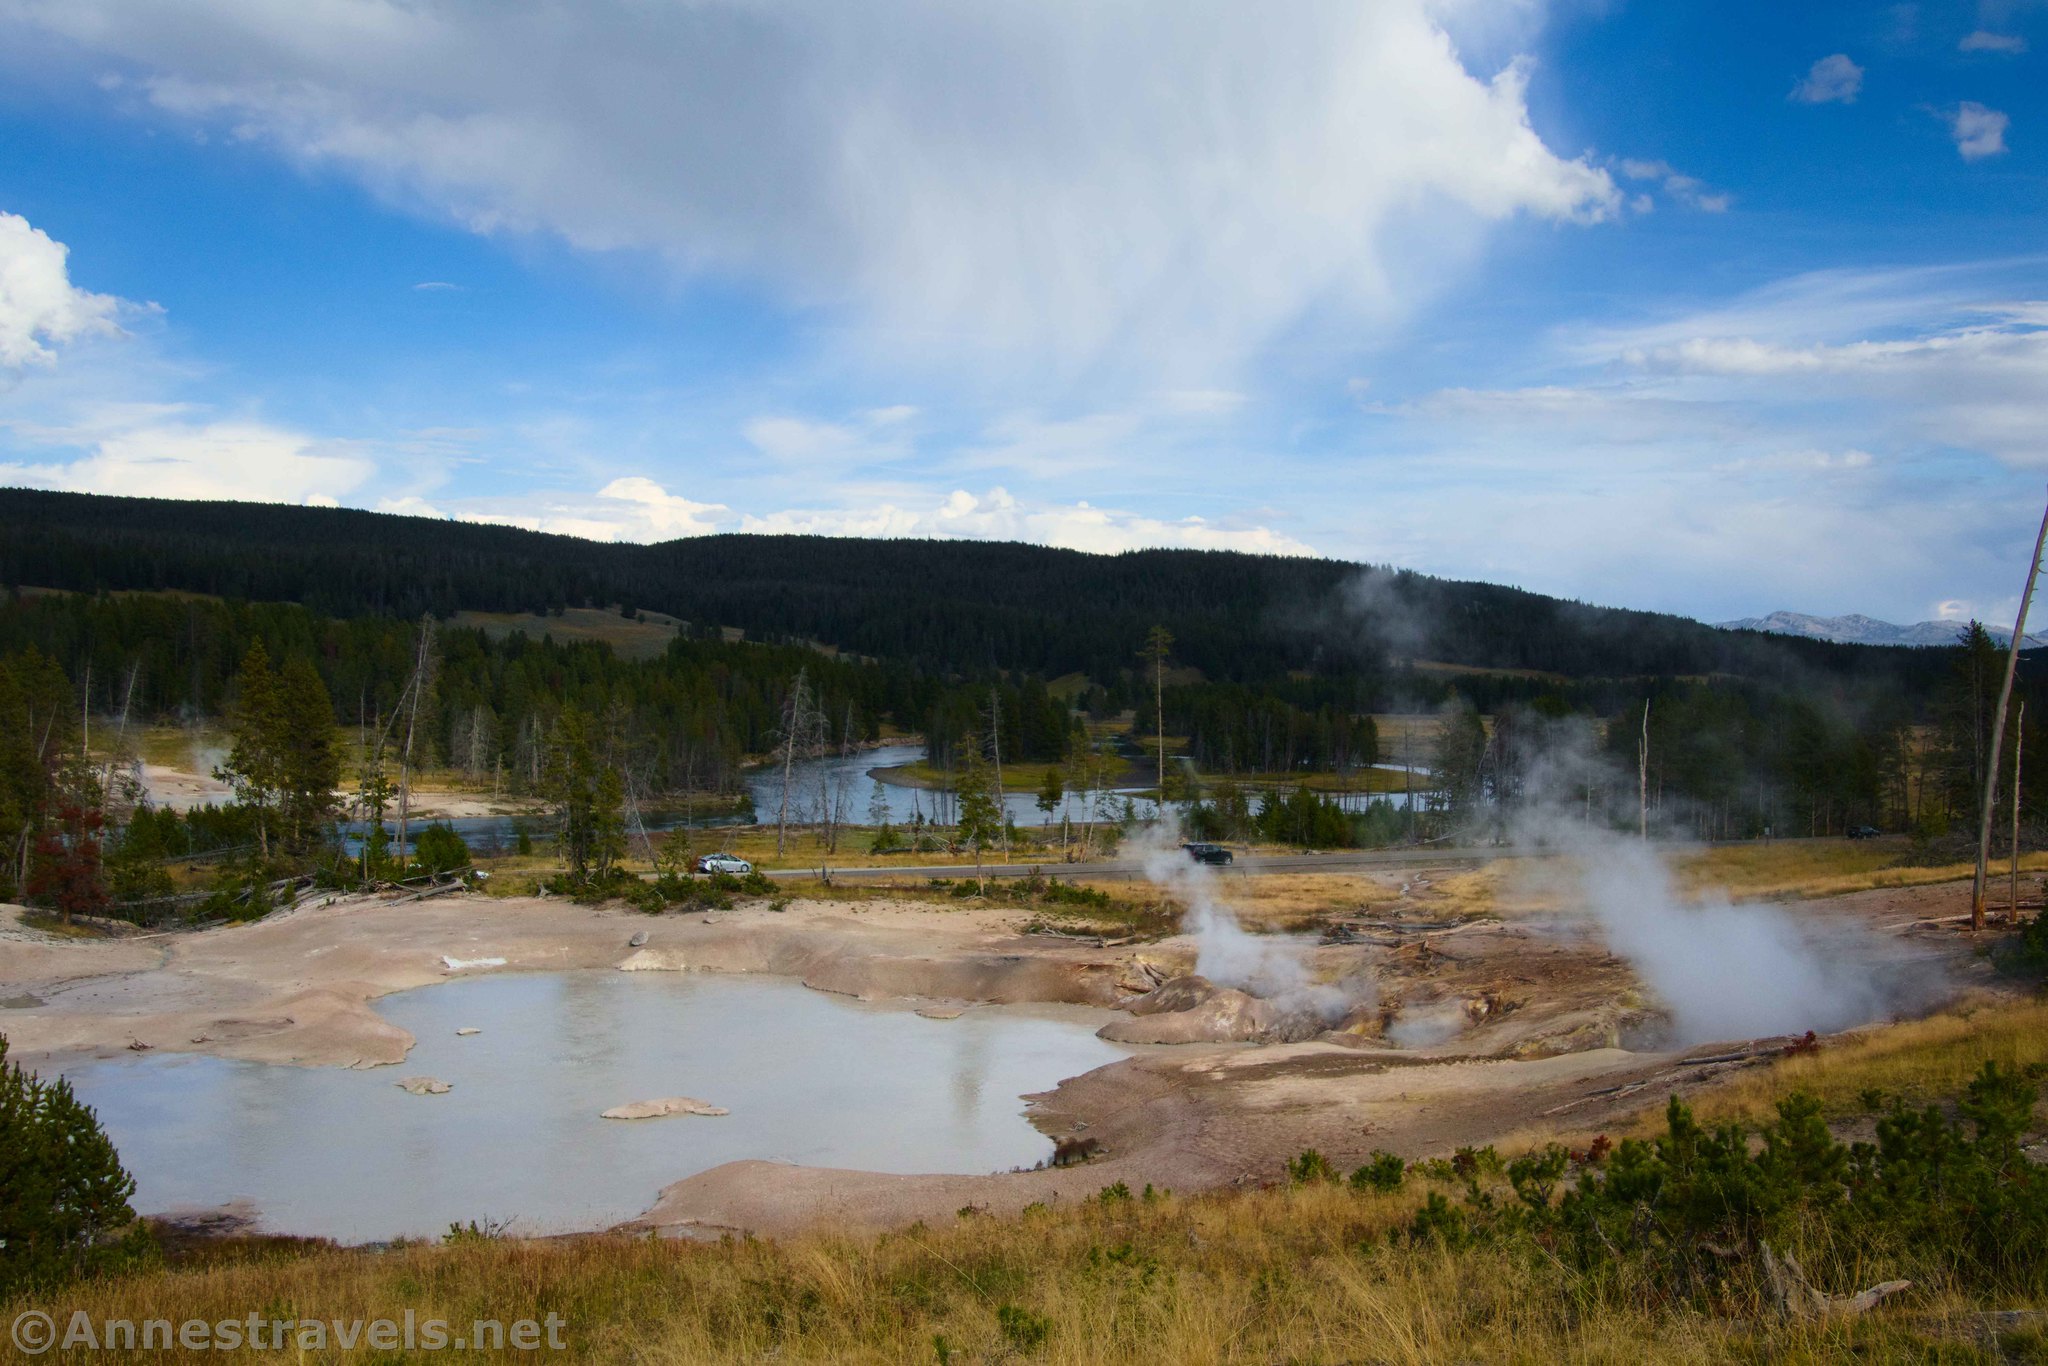 Views down to the Mud Caldron and the Yellowstone River from the Mud Volcano Area, Yellowstone National Park, Wyoming